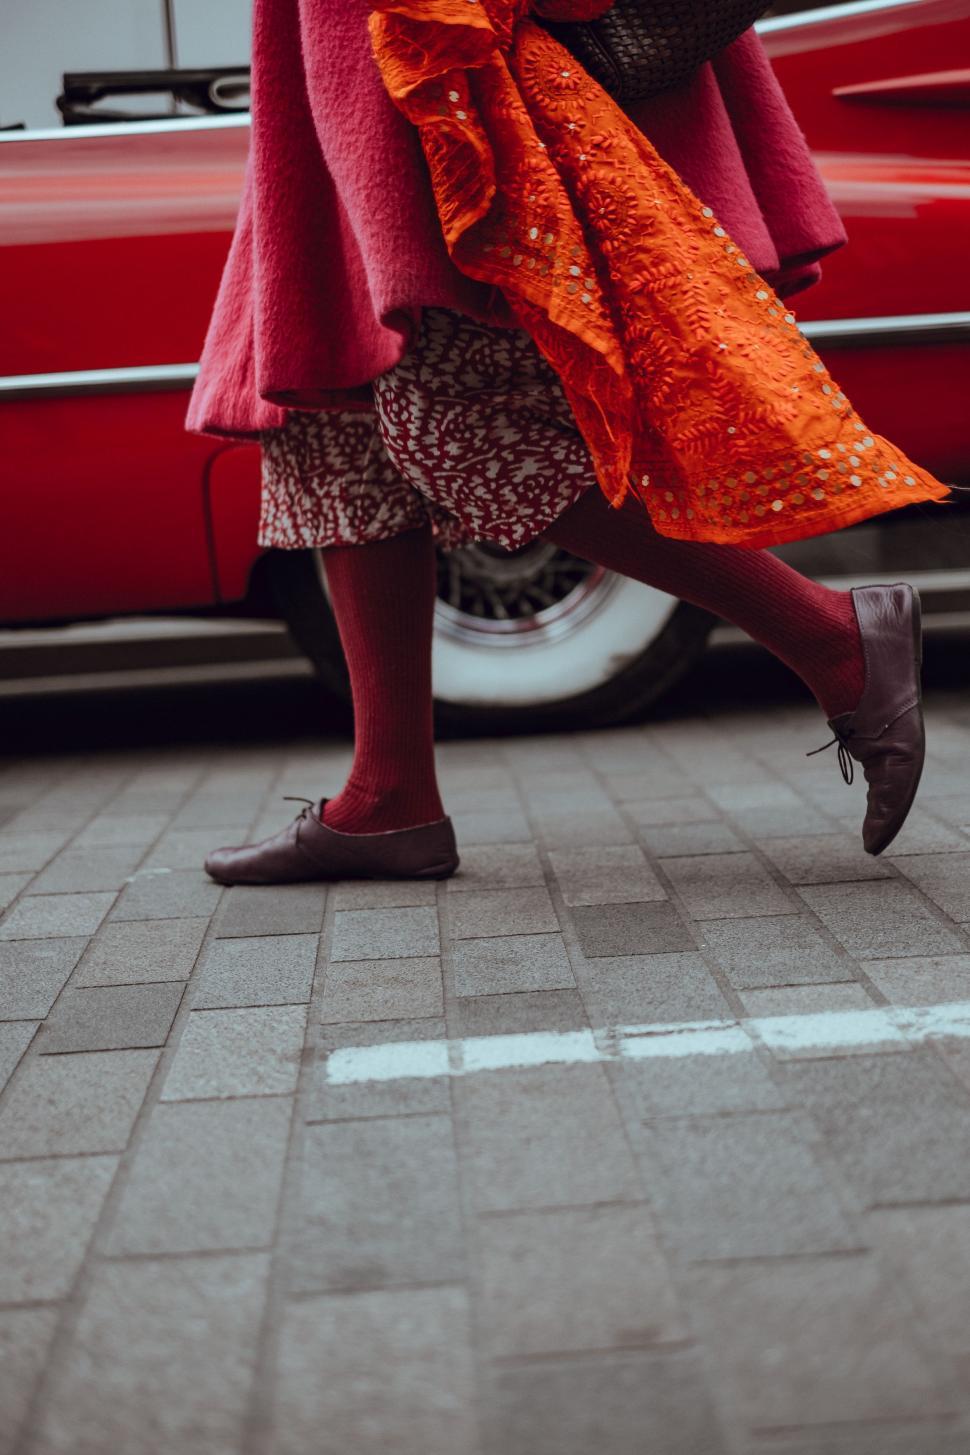 Free Image of Woman in Red Coat Walking by Red Car 